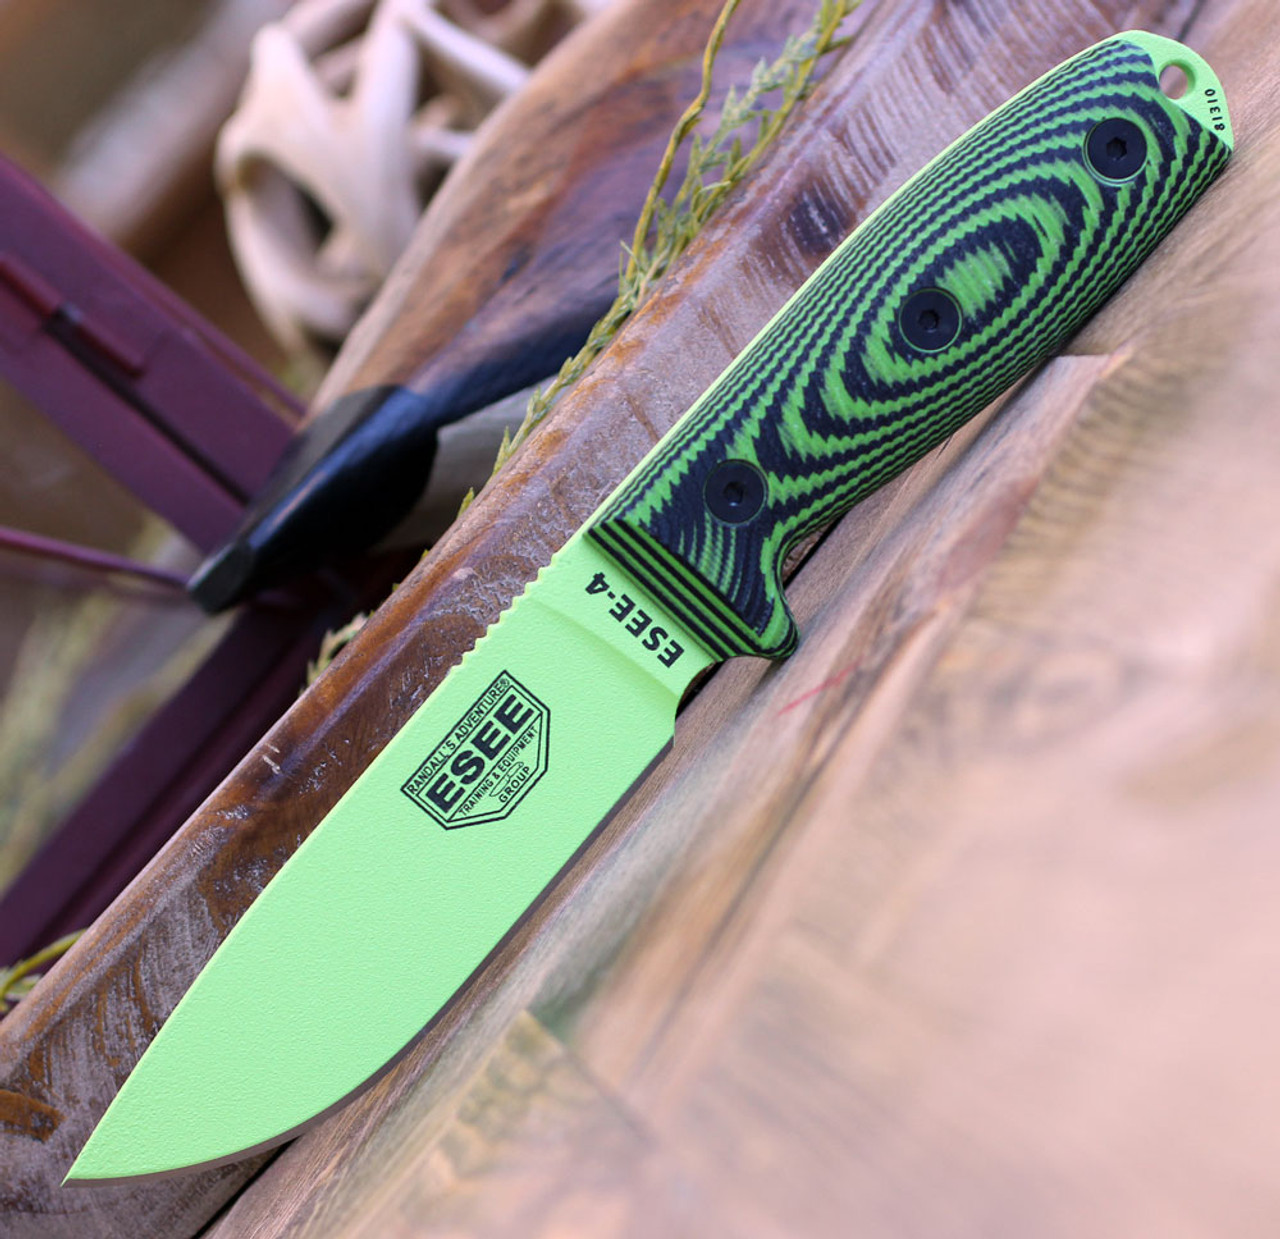 ESEE-4 3D Handle Fixed Blade Knife (ESEE-4PVG-007)- 4.50" Venom Green 1095 Drop Point Blade, Neon Green and Black 3D Handle